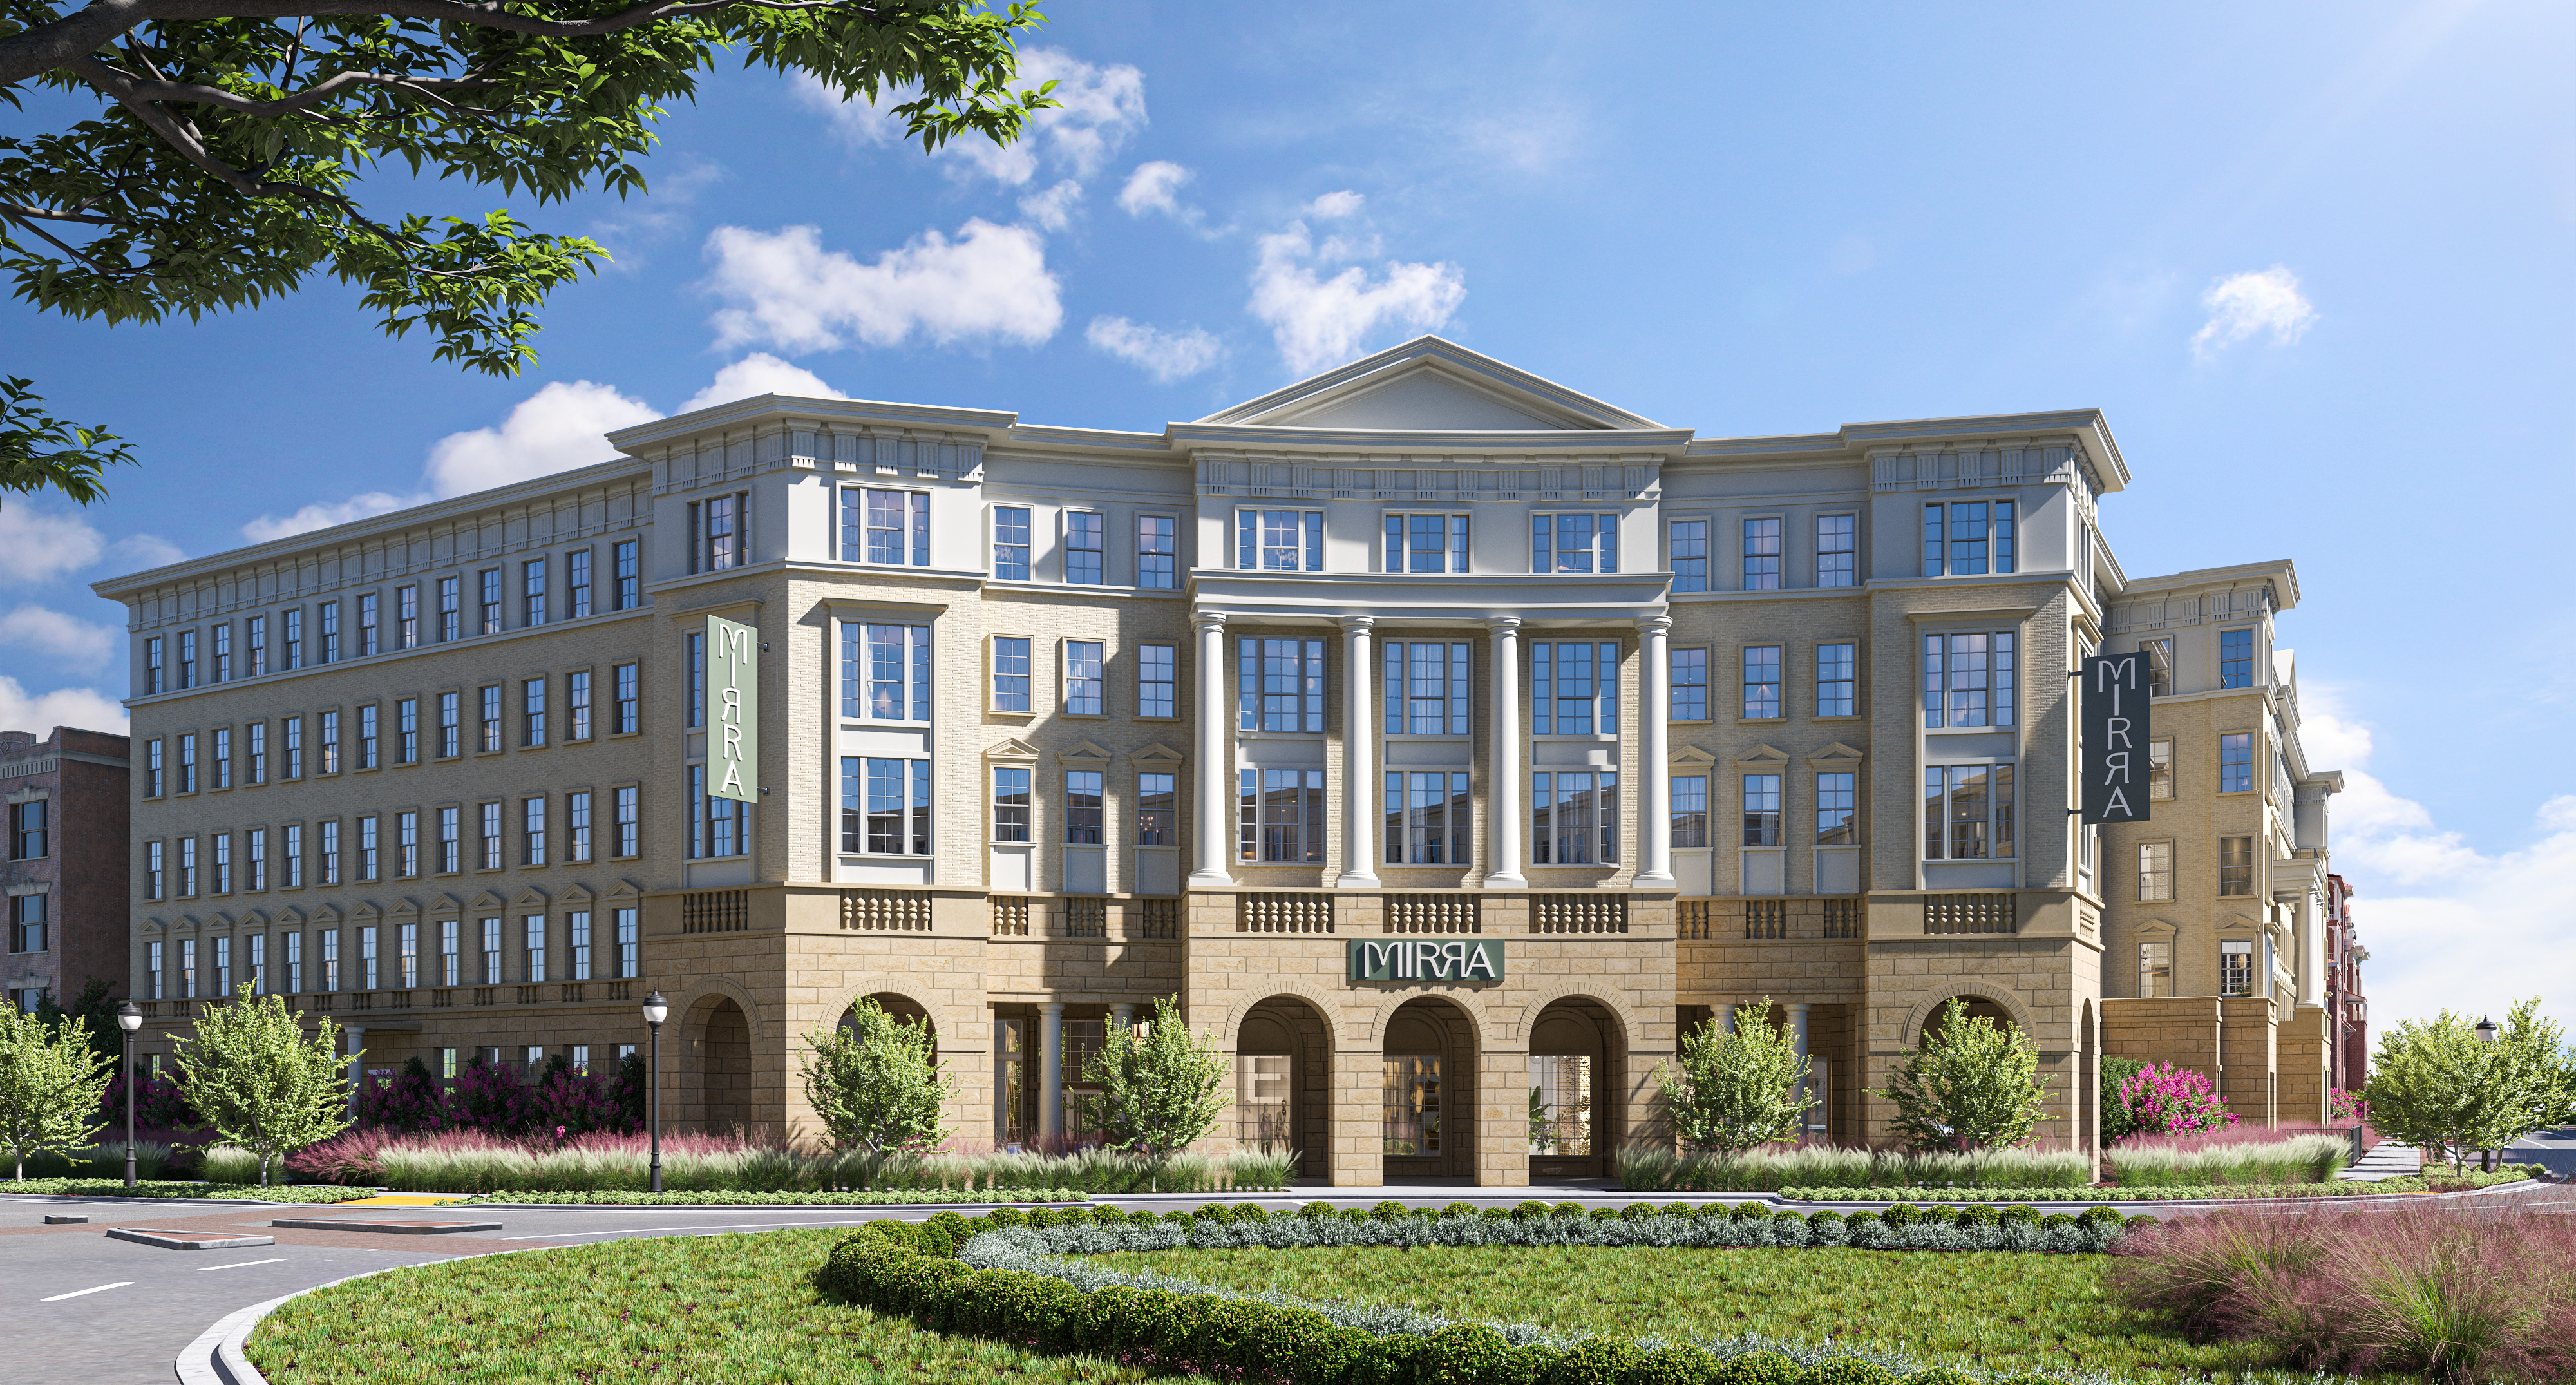 Construction has begun on community featuring 285 luxury residences and totaling more than 330,000 square feet in the Dallas-Fort Worth Metro Area.